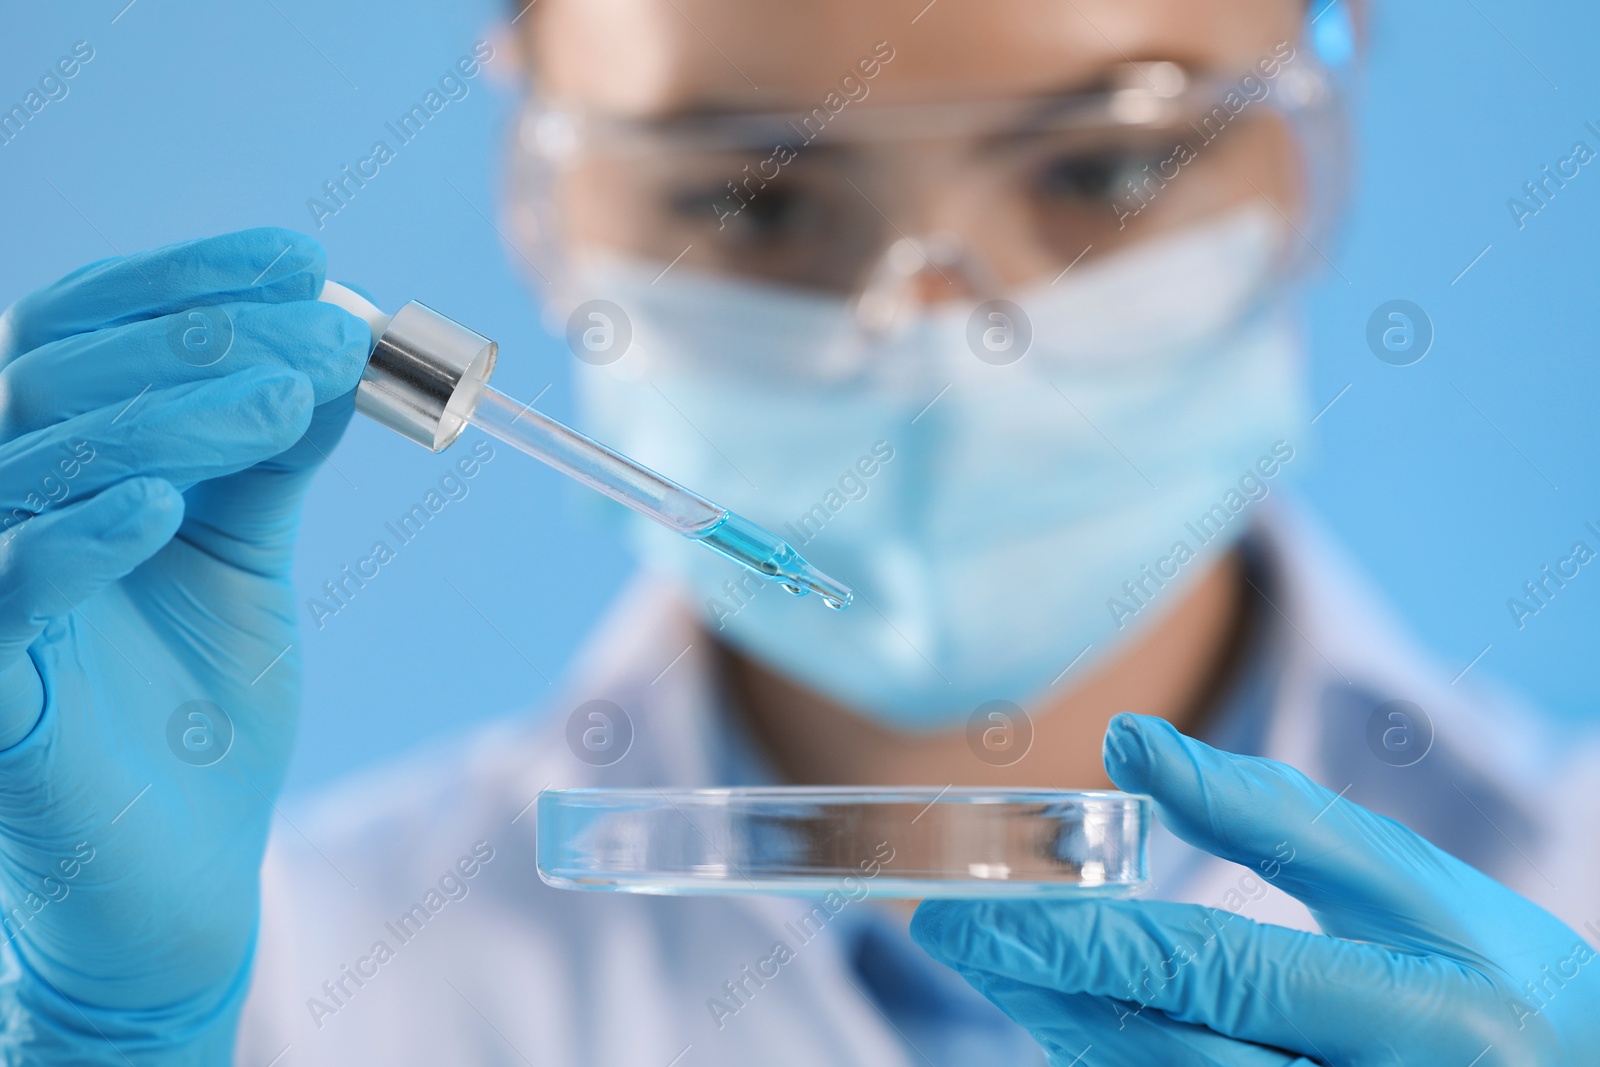 Photo of Scientist dripping liquid from pipette into petri dish on light blue background, focus on hands